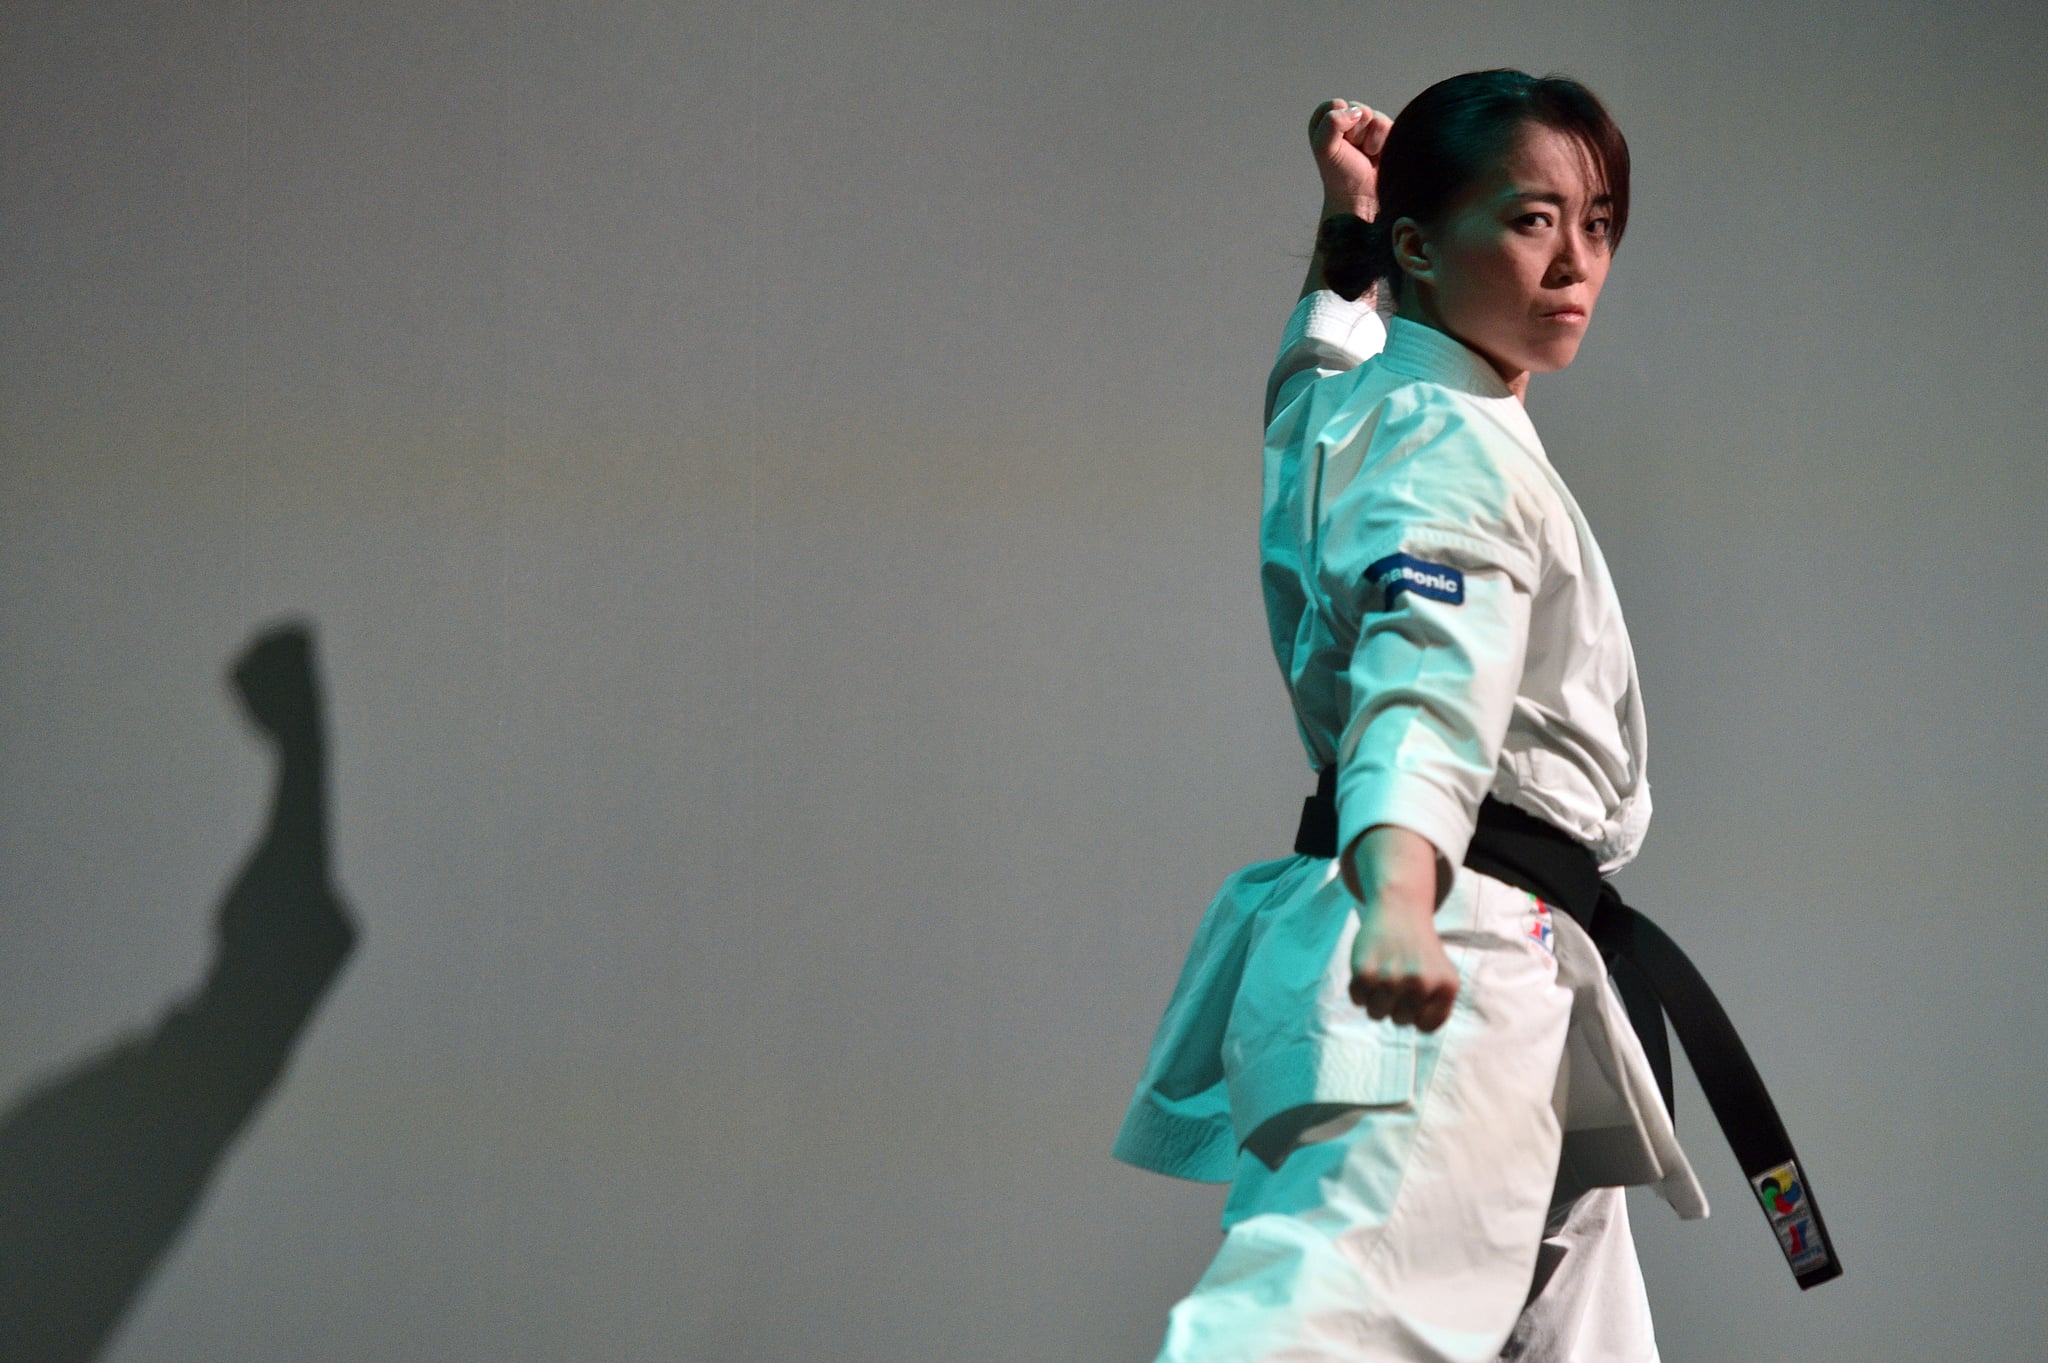 LAS VEGAS, NEVADA - JANUARY 06: Martial artist Sakura Kokumai performs during a Panasonic press event for CES 2020 at the Mandalay Bay Convention Centre on January 6, 2020 in Las Vegas, Nevada. CES, the world's largest annual consumer technology trade show, runs January 7-10 and features about 4,500 exhibitors showing off their latest products and services to more than 170,000 attendees. (Photo by David Becker/Getty Images)